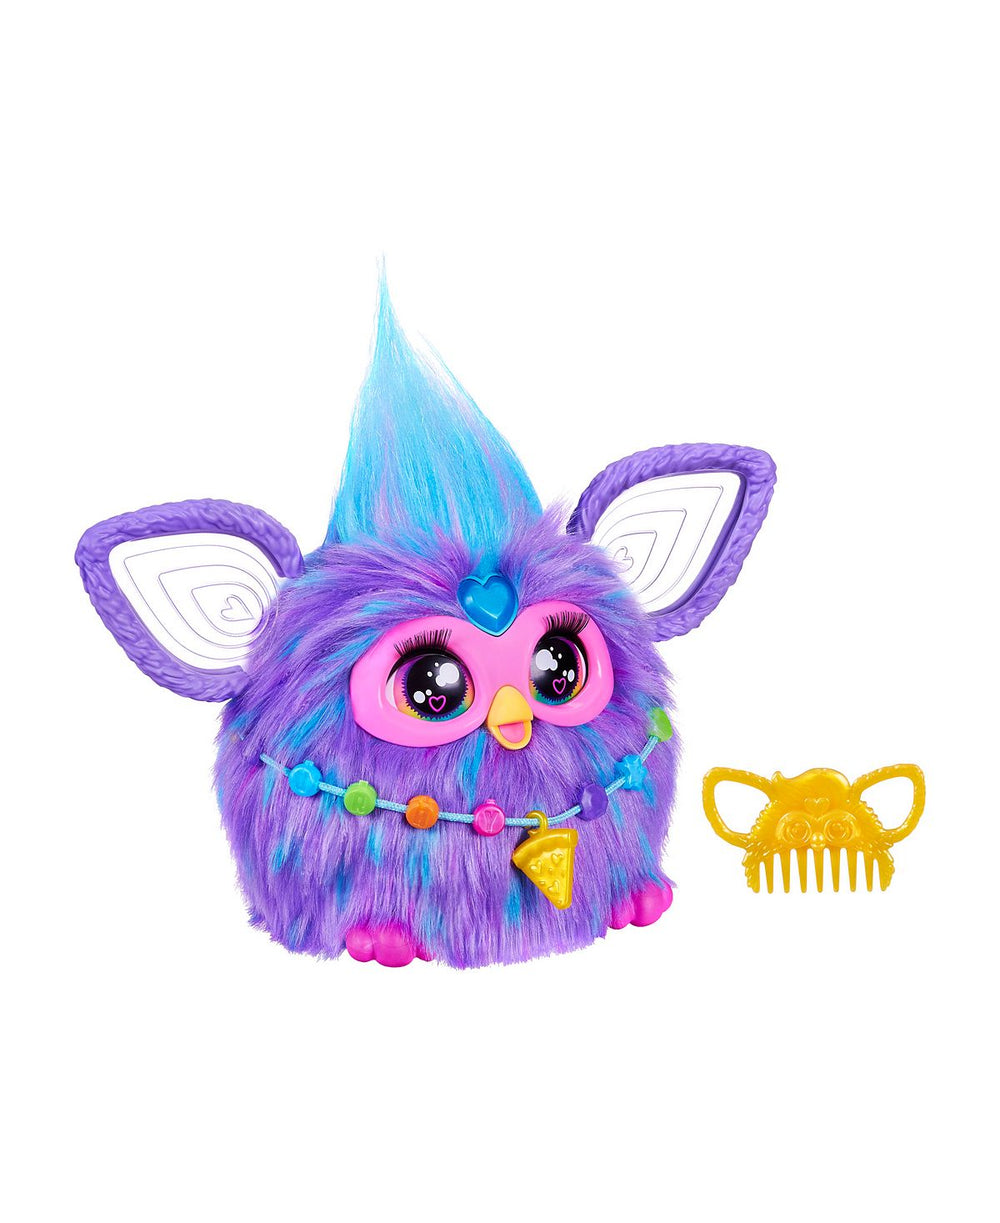 Furby Interactive Toy, Vibrant Purple - Voice-Activated Pet